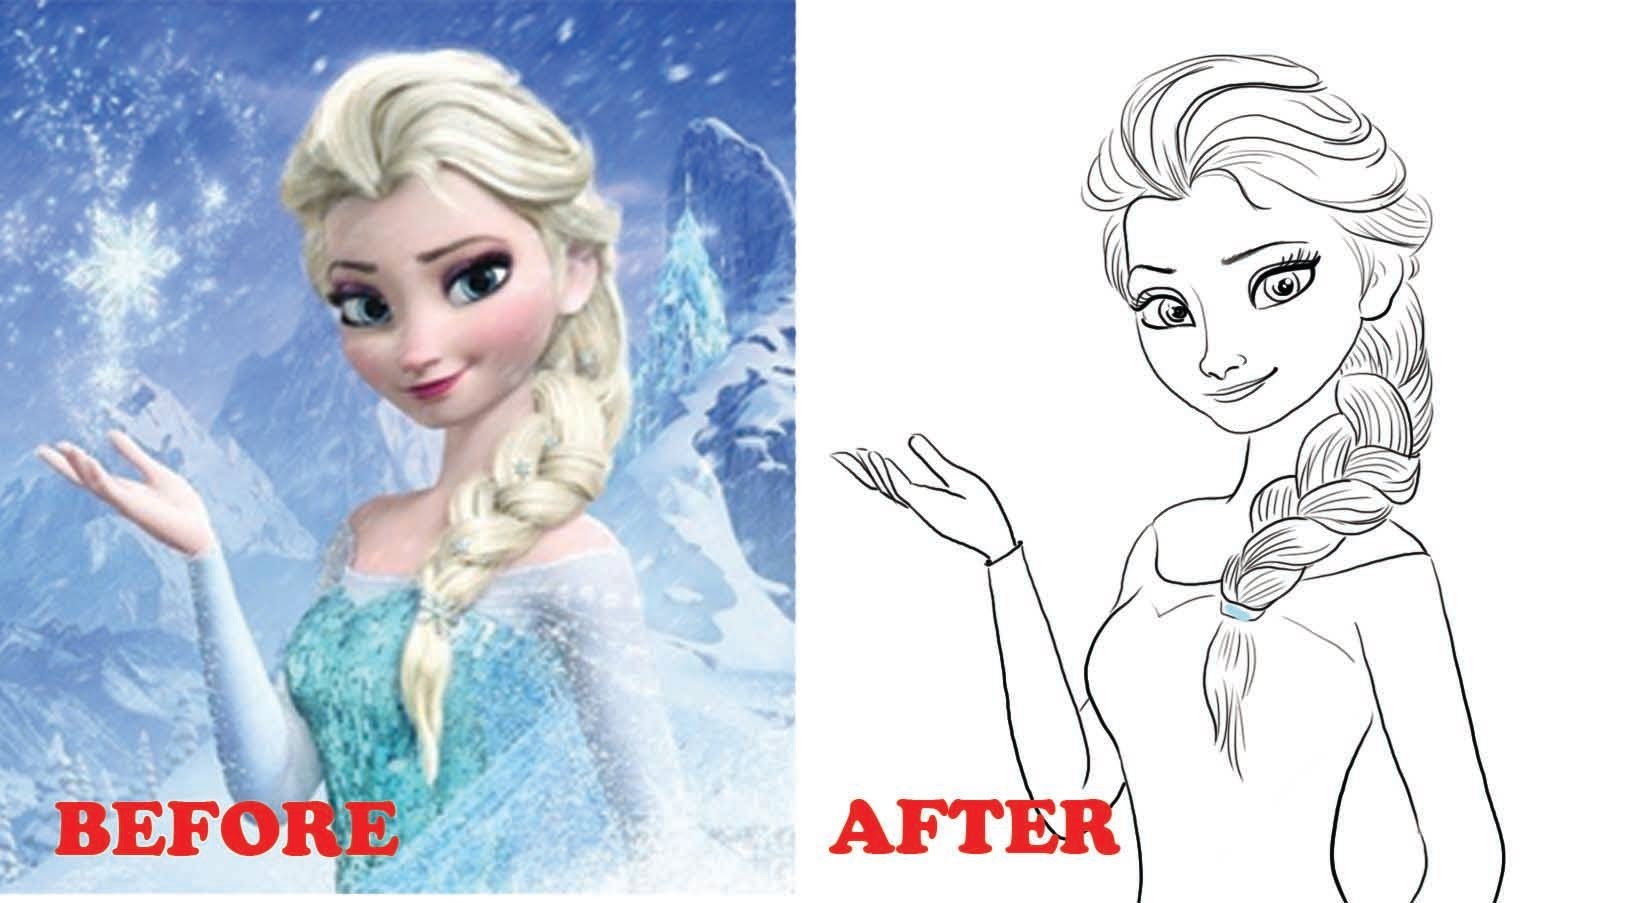 How To Draw Elsa From Frozen Step By Step Tutorial Pencil Sketch